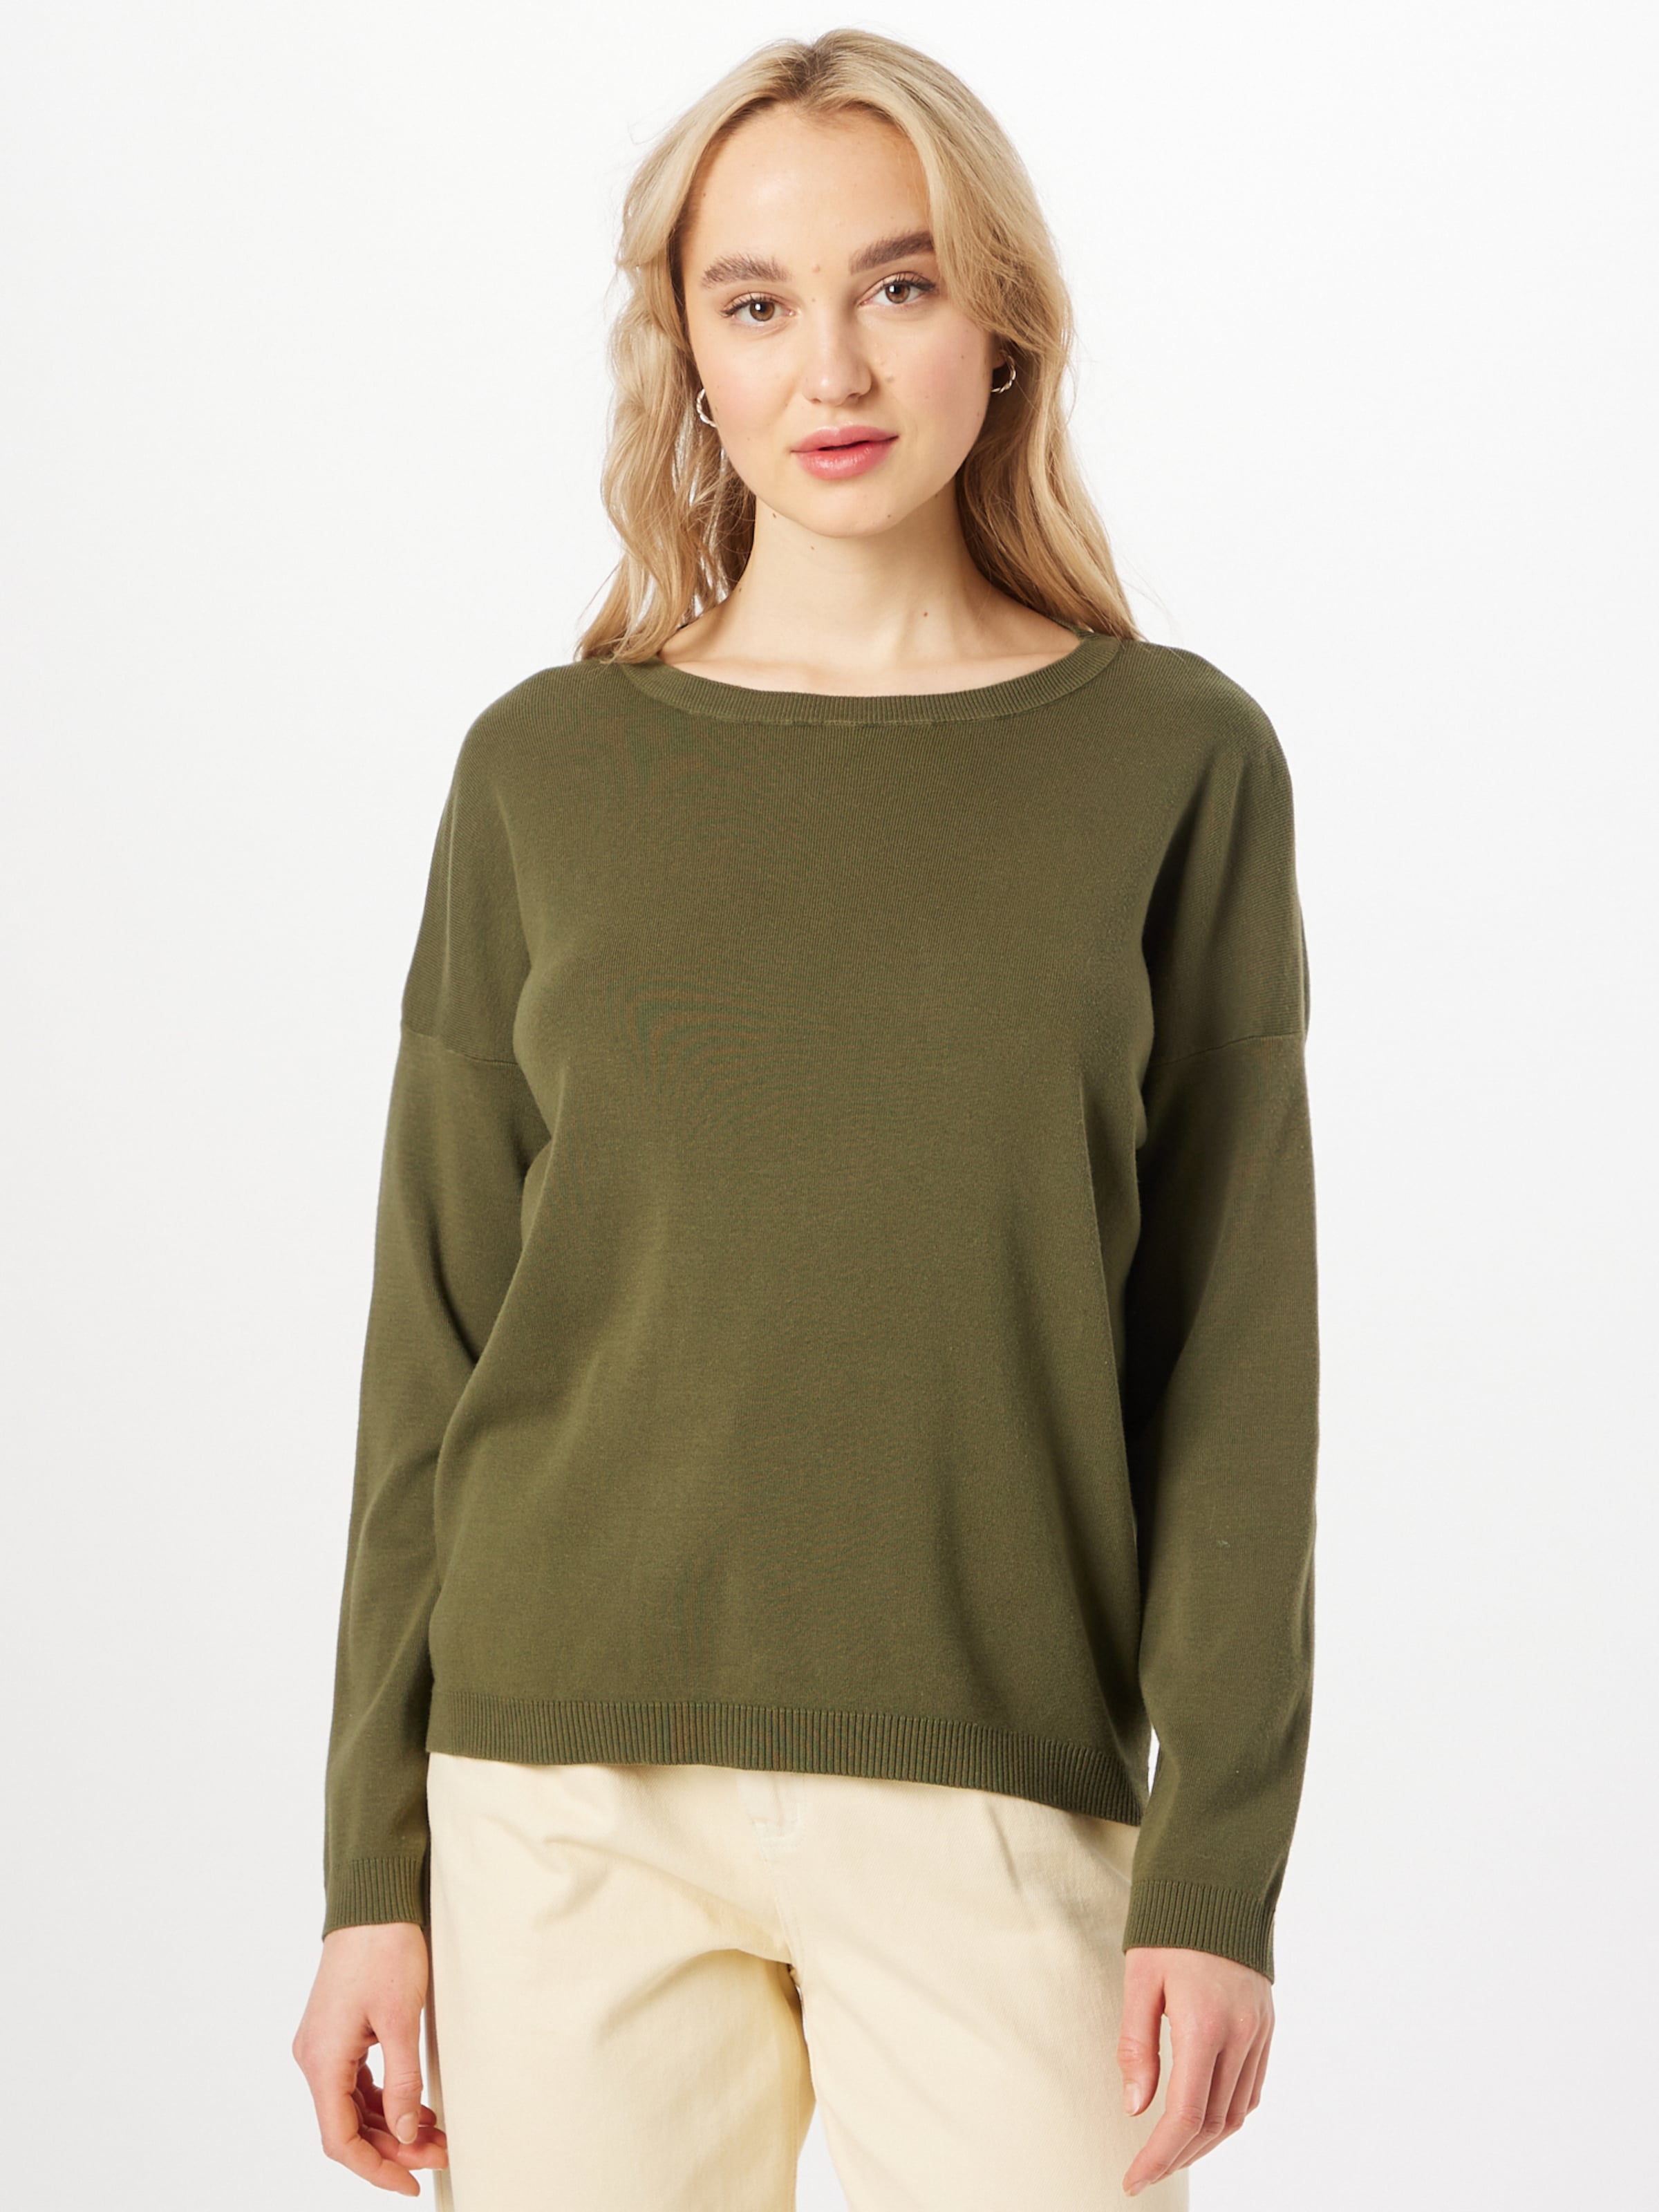 Frauen Pullover & Strick UNITED COLORS OF BENETTON Pullover in Khaki - YS38806